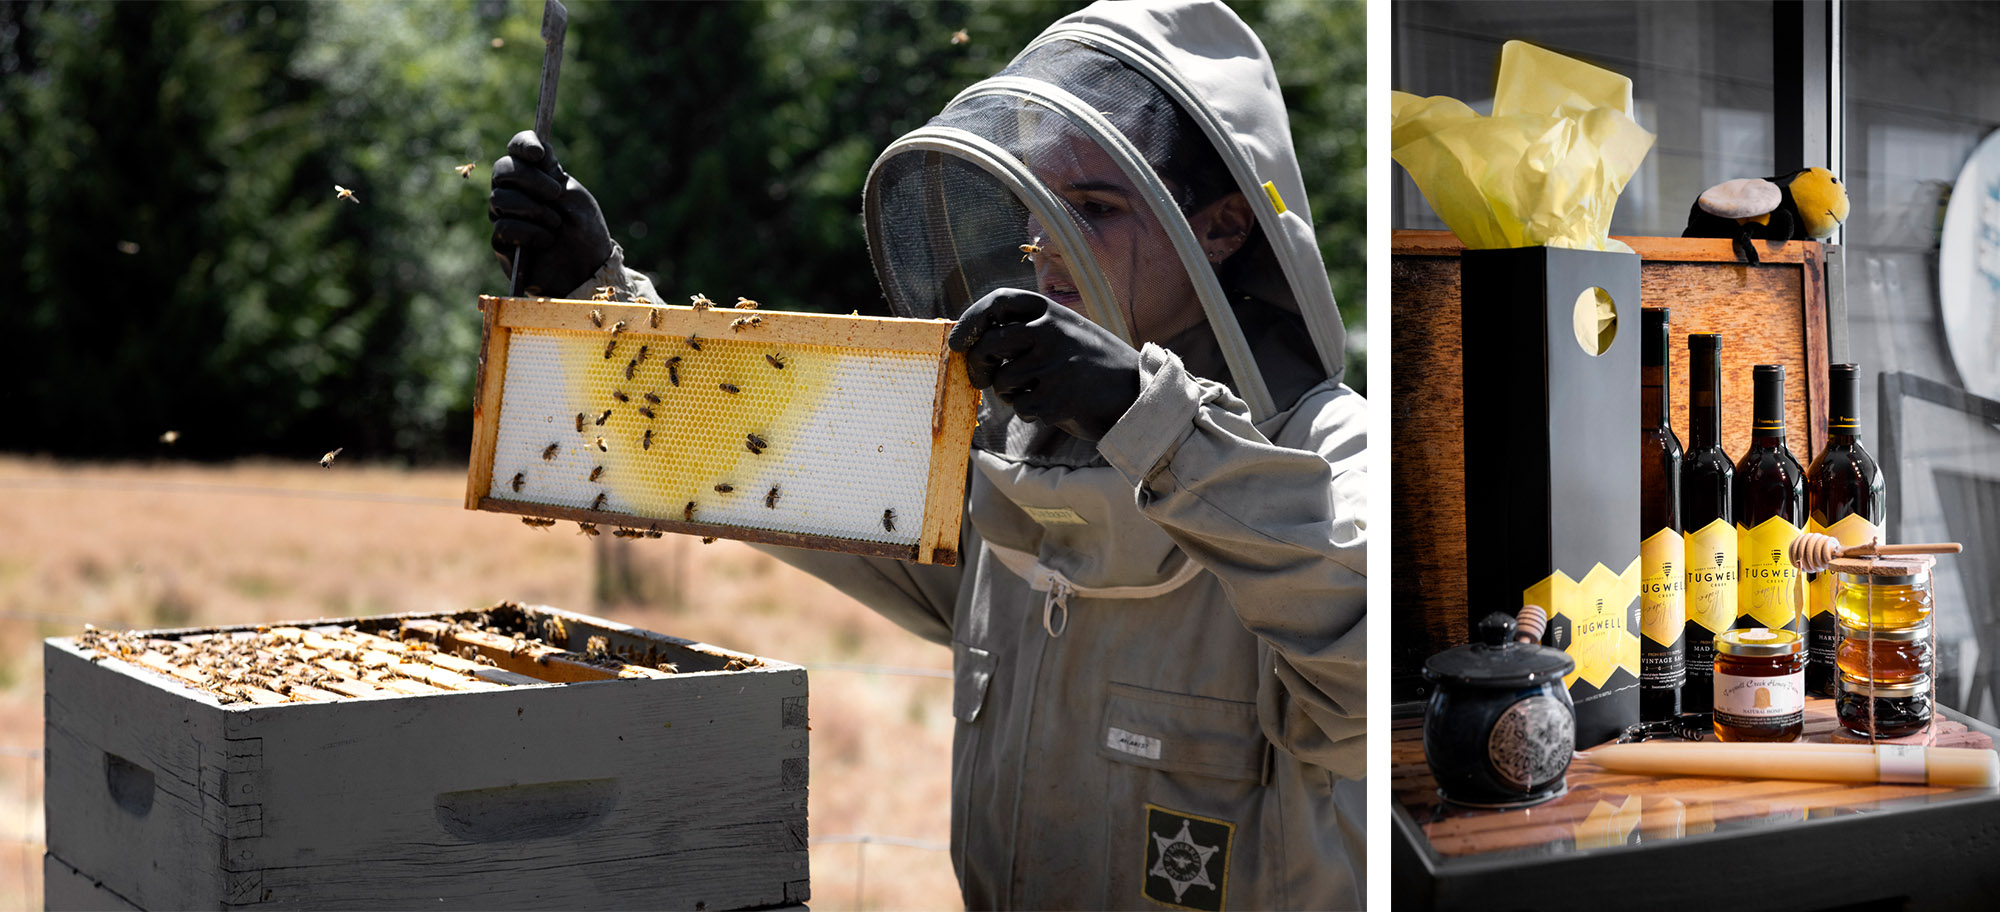 Local beekeepers provide the natural ingredients for Tugwell products.